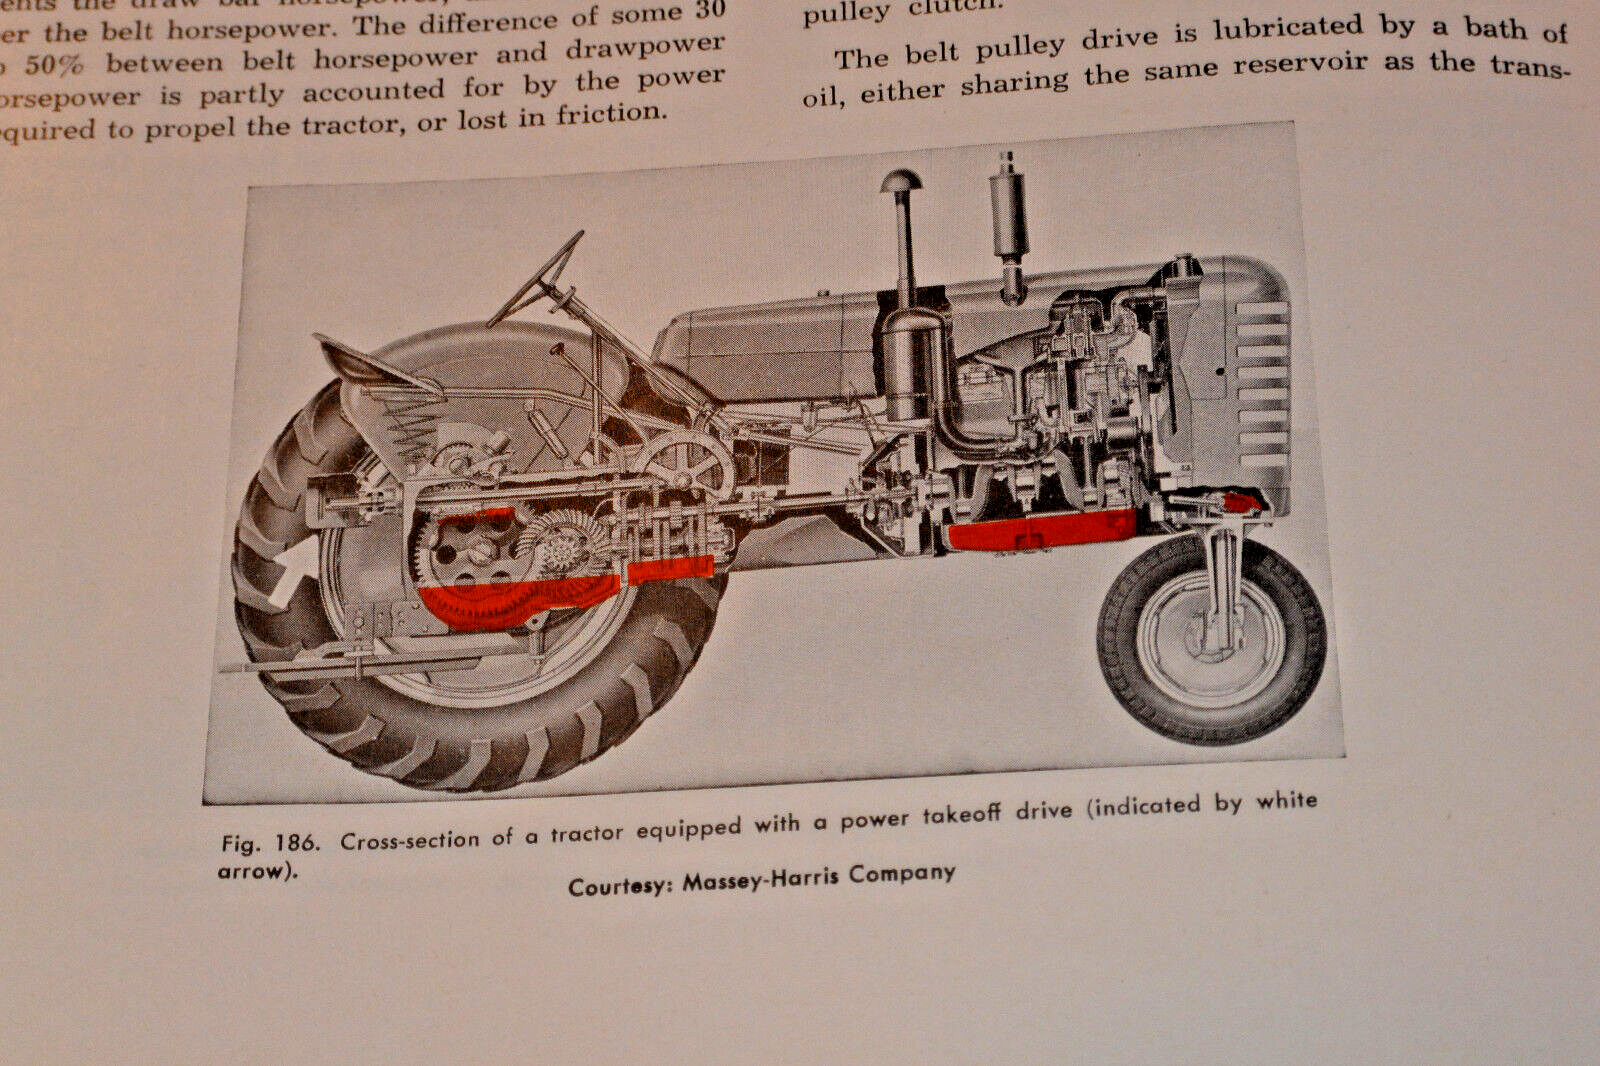 VINTAGE 1956 ENGINEERS BULLETIN, OPERATIONS AND MAINTENANCE OF FARM TRACTORS